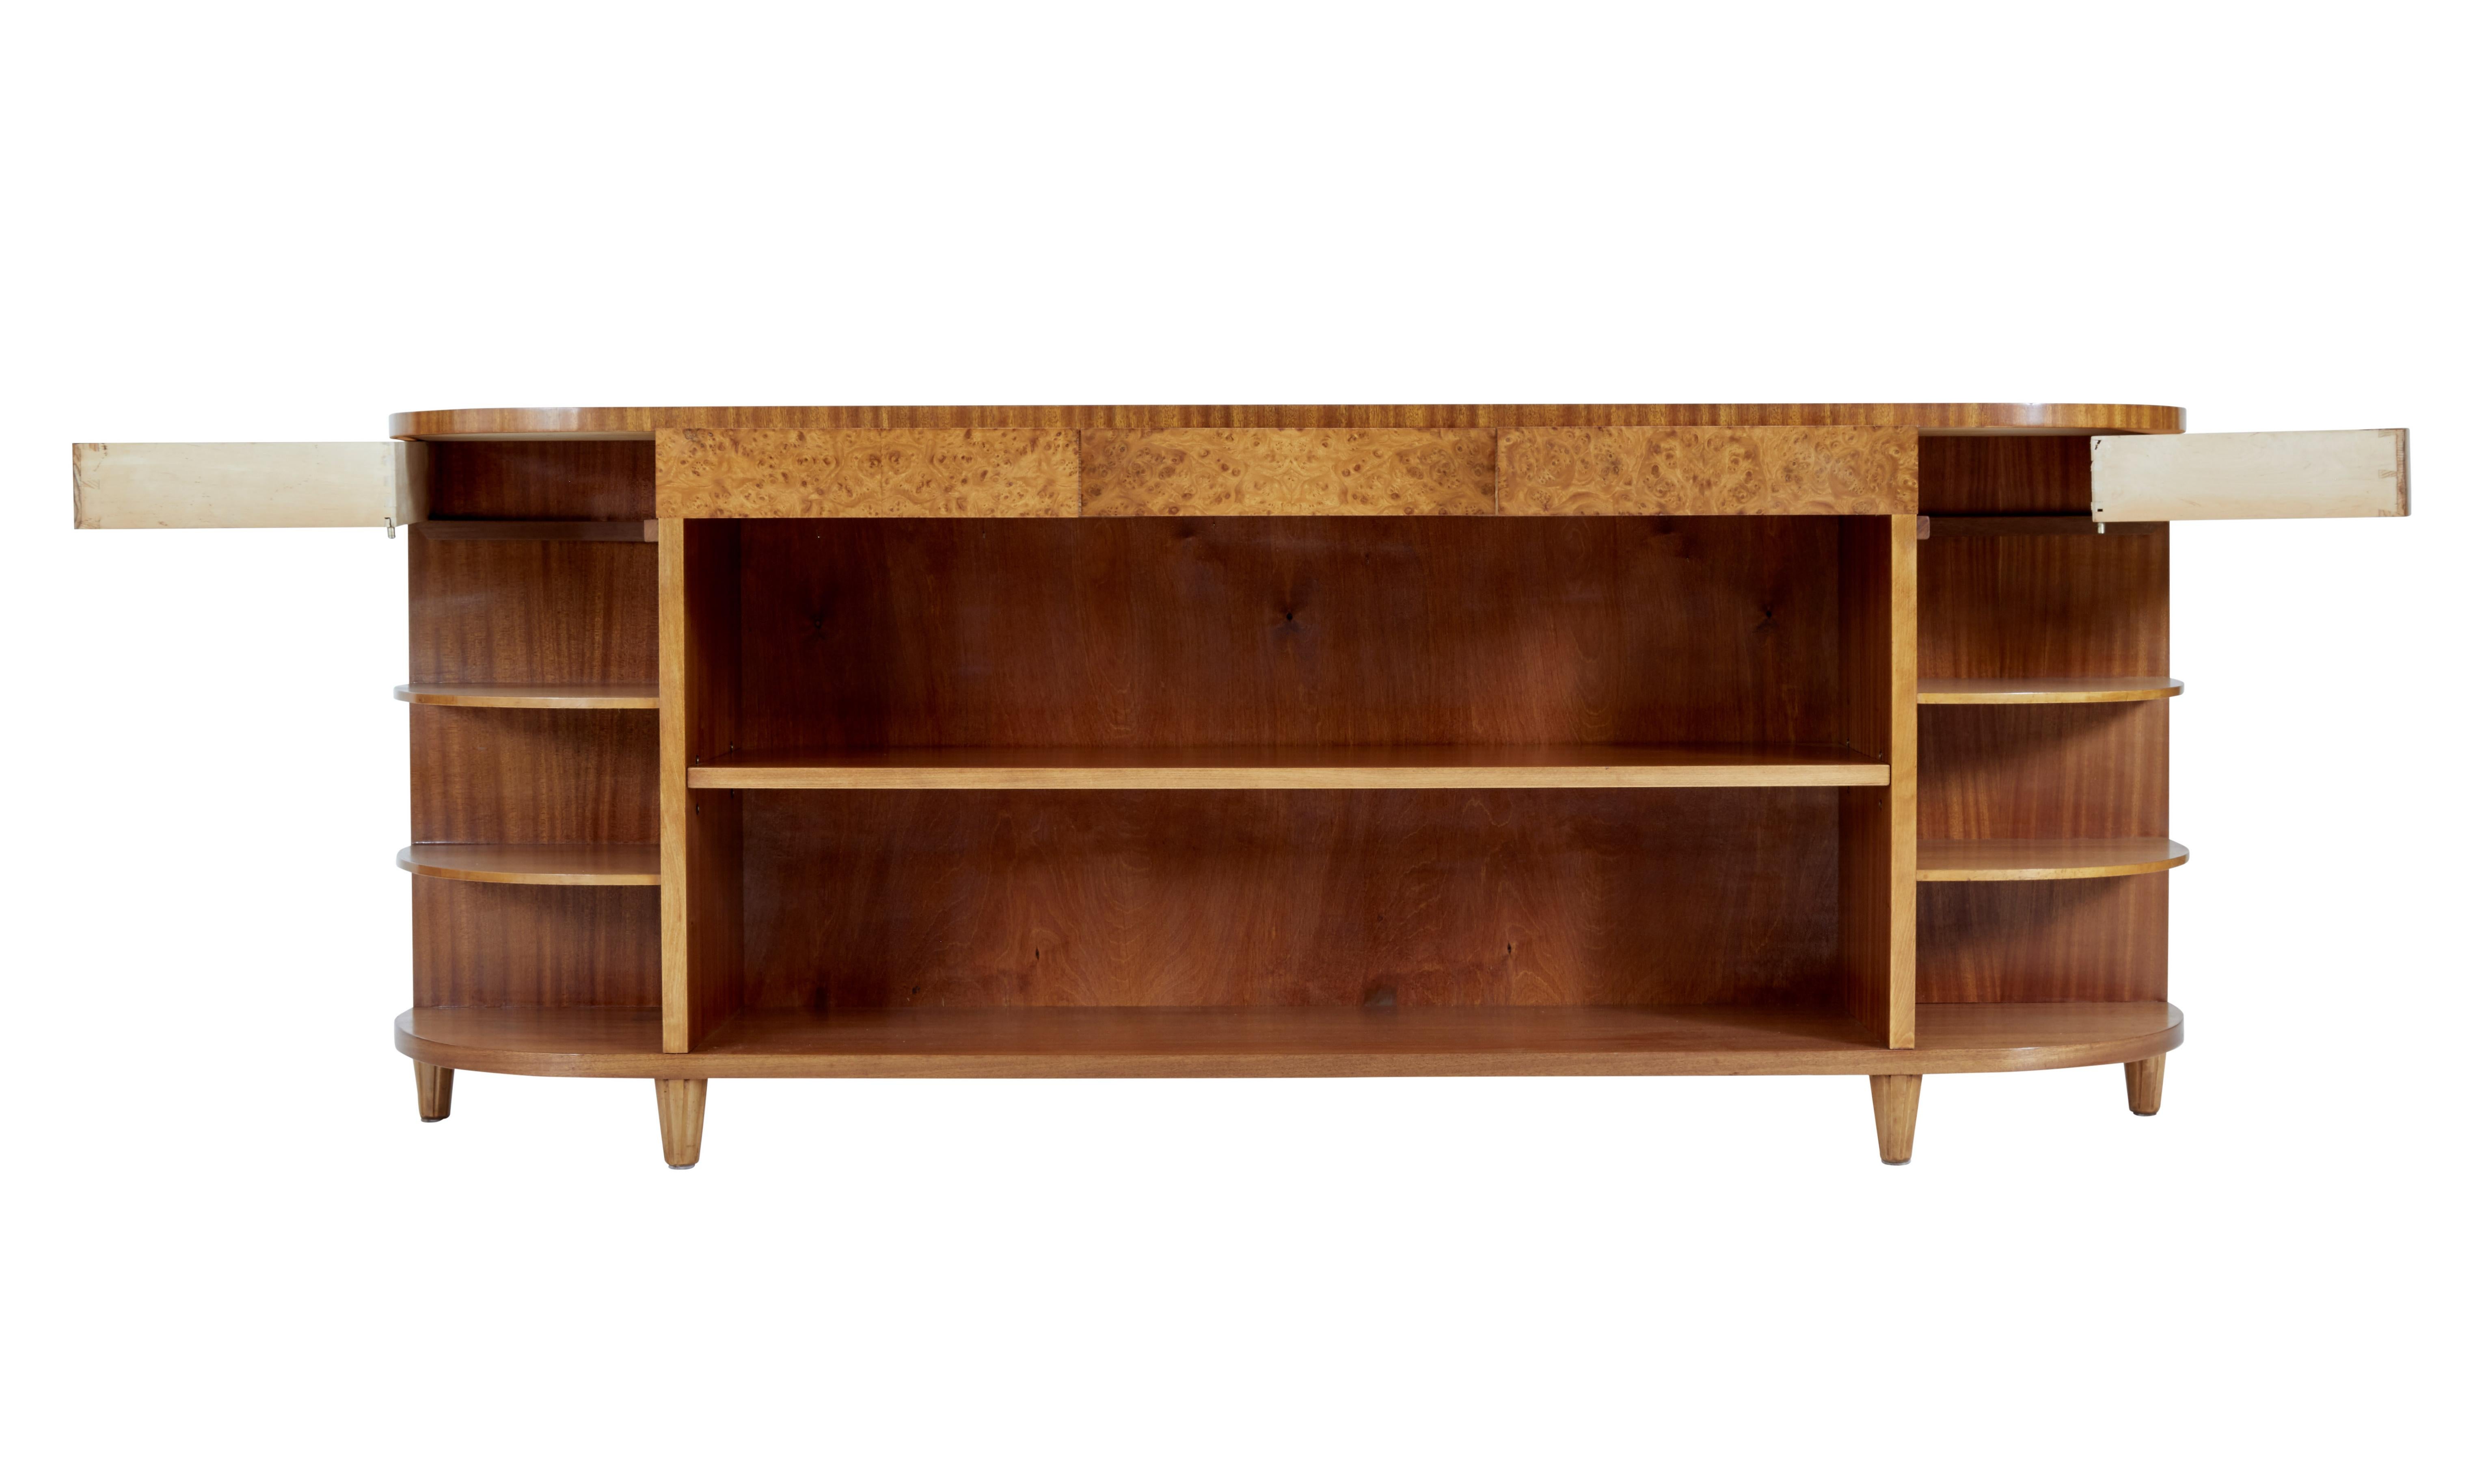 Large mid 20th century Scandinavian low open mahogany bookcase circa 1960.

Good quality shaped low open bookcase. Matched veneer top with 3 burr drawers below the surface and 2 swing out drawers on each end. Main storage area with a single